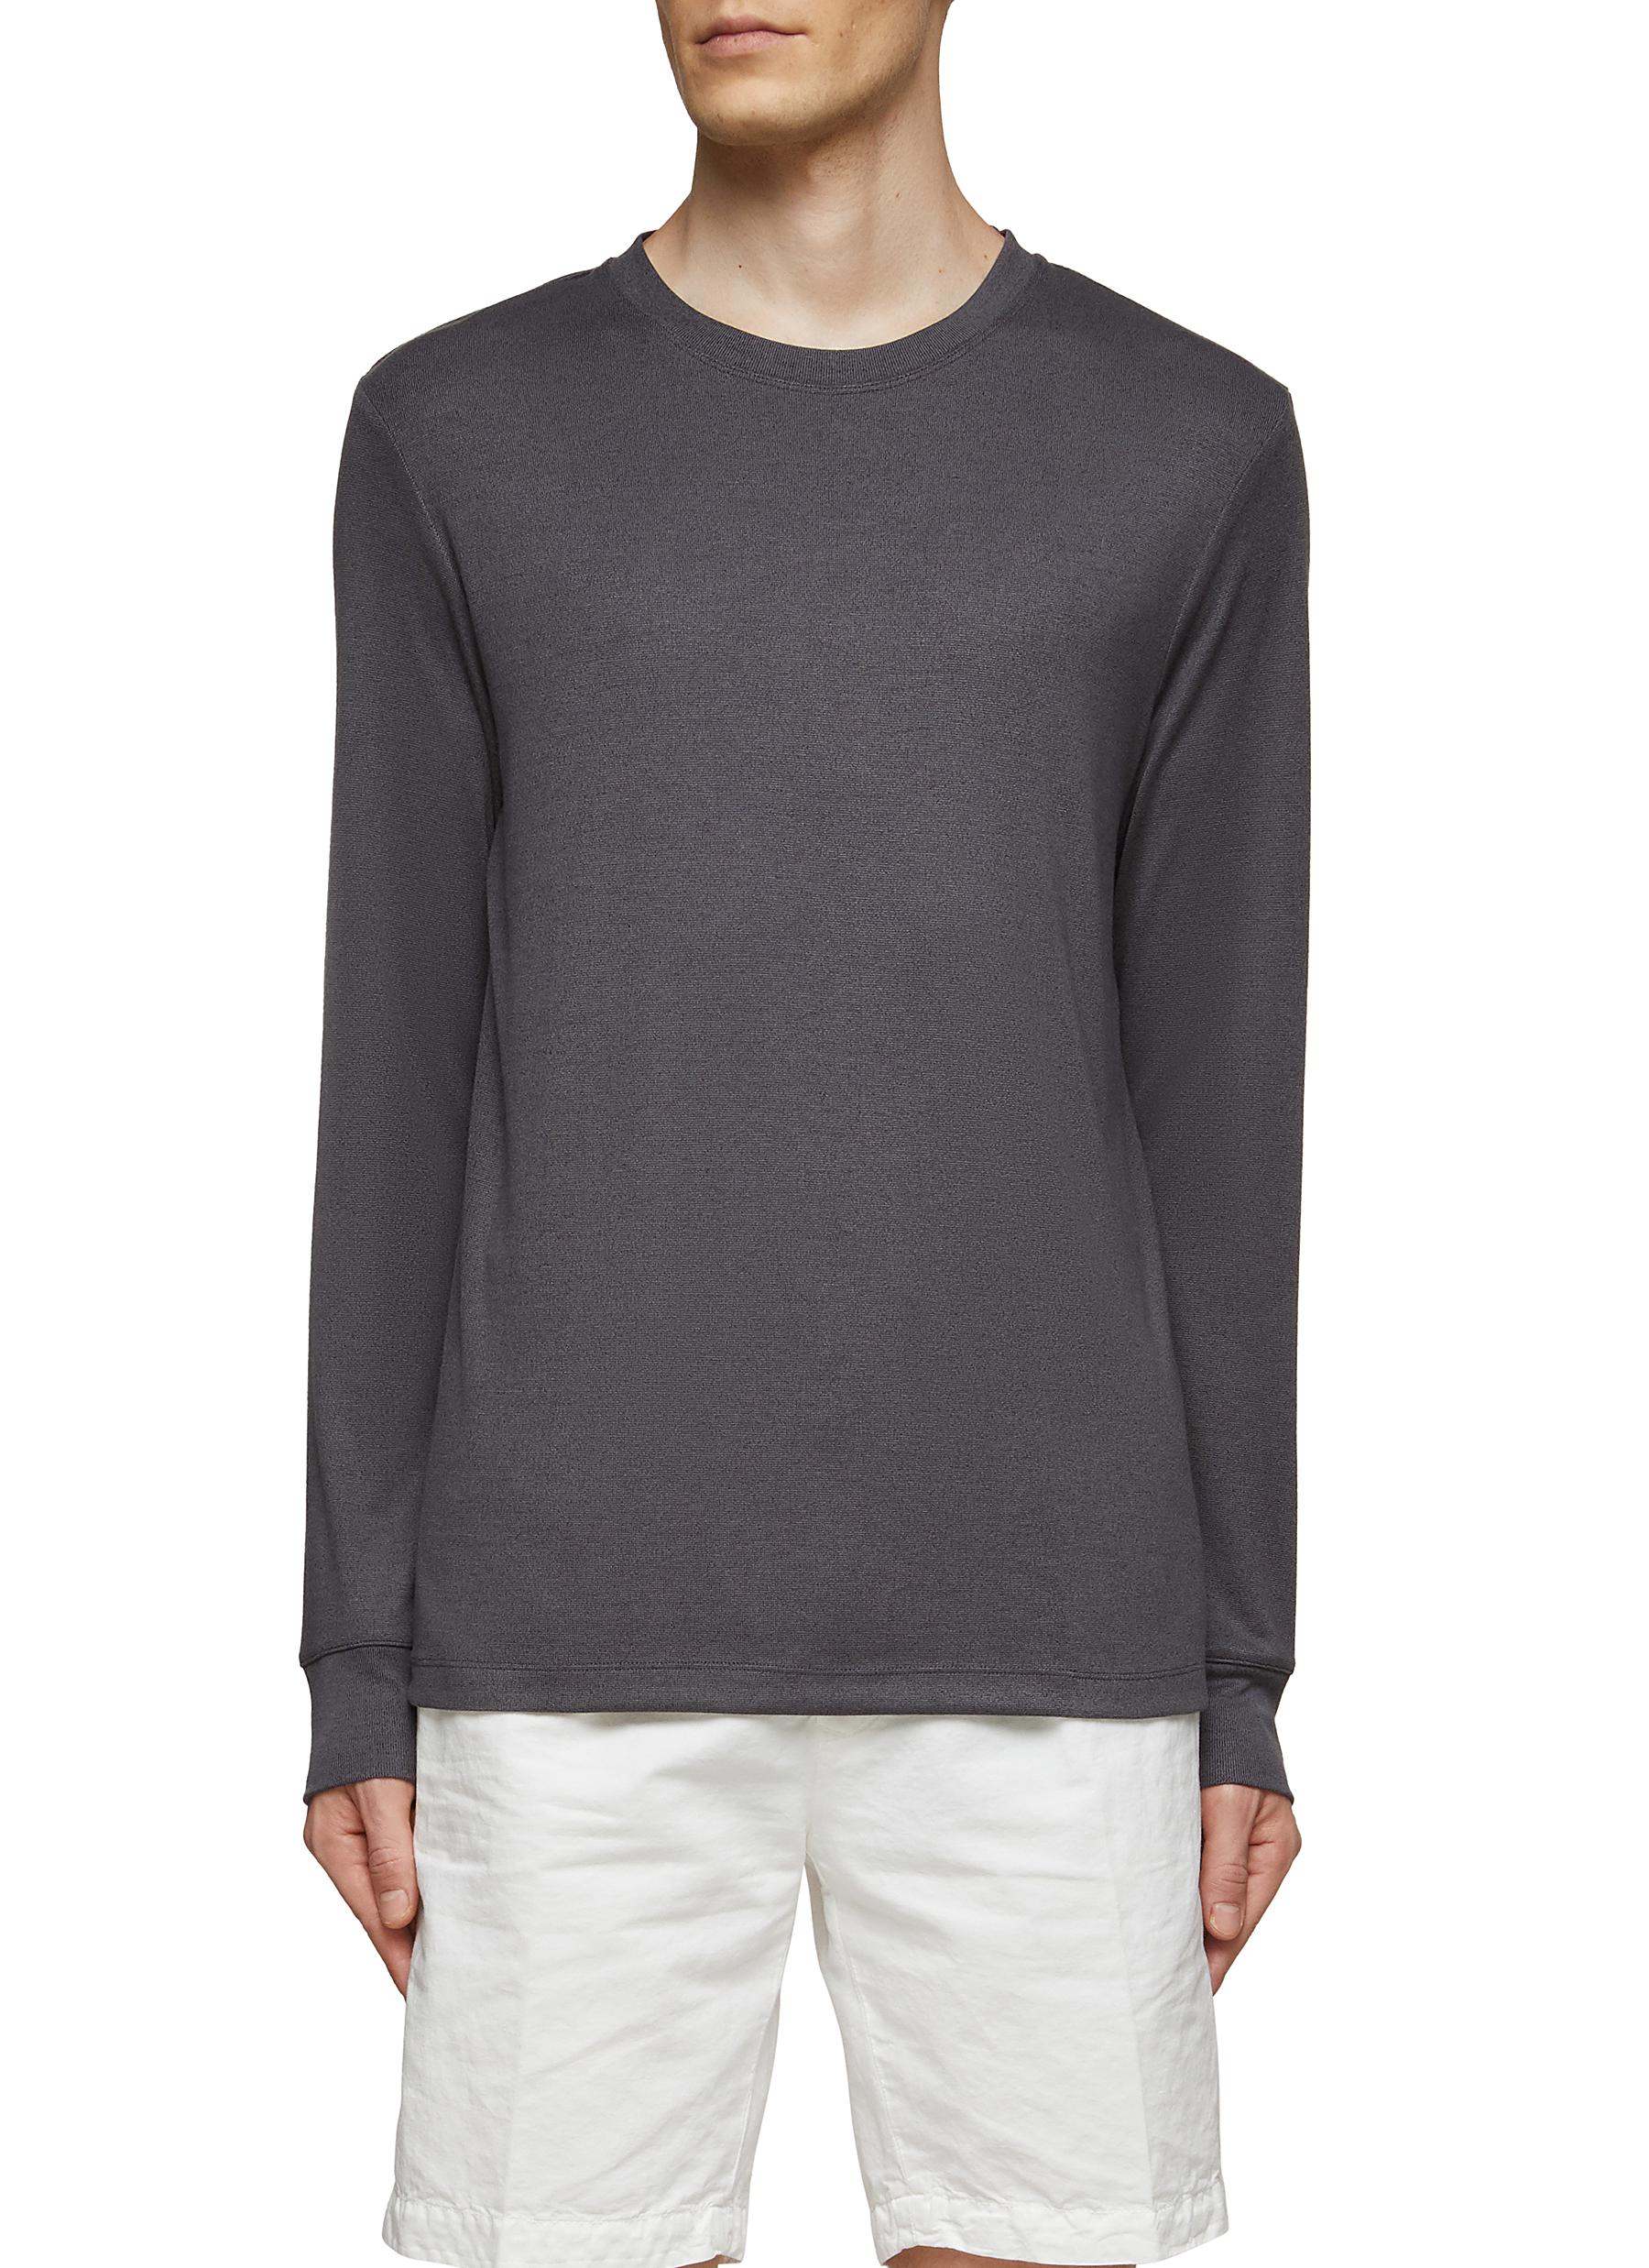 THEORY LONG SLEEVE STRETCH ESSENTIAL T-SHIRT